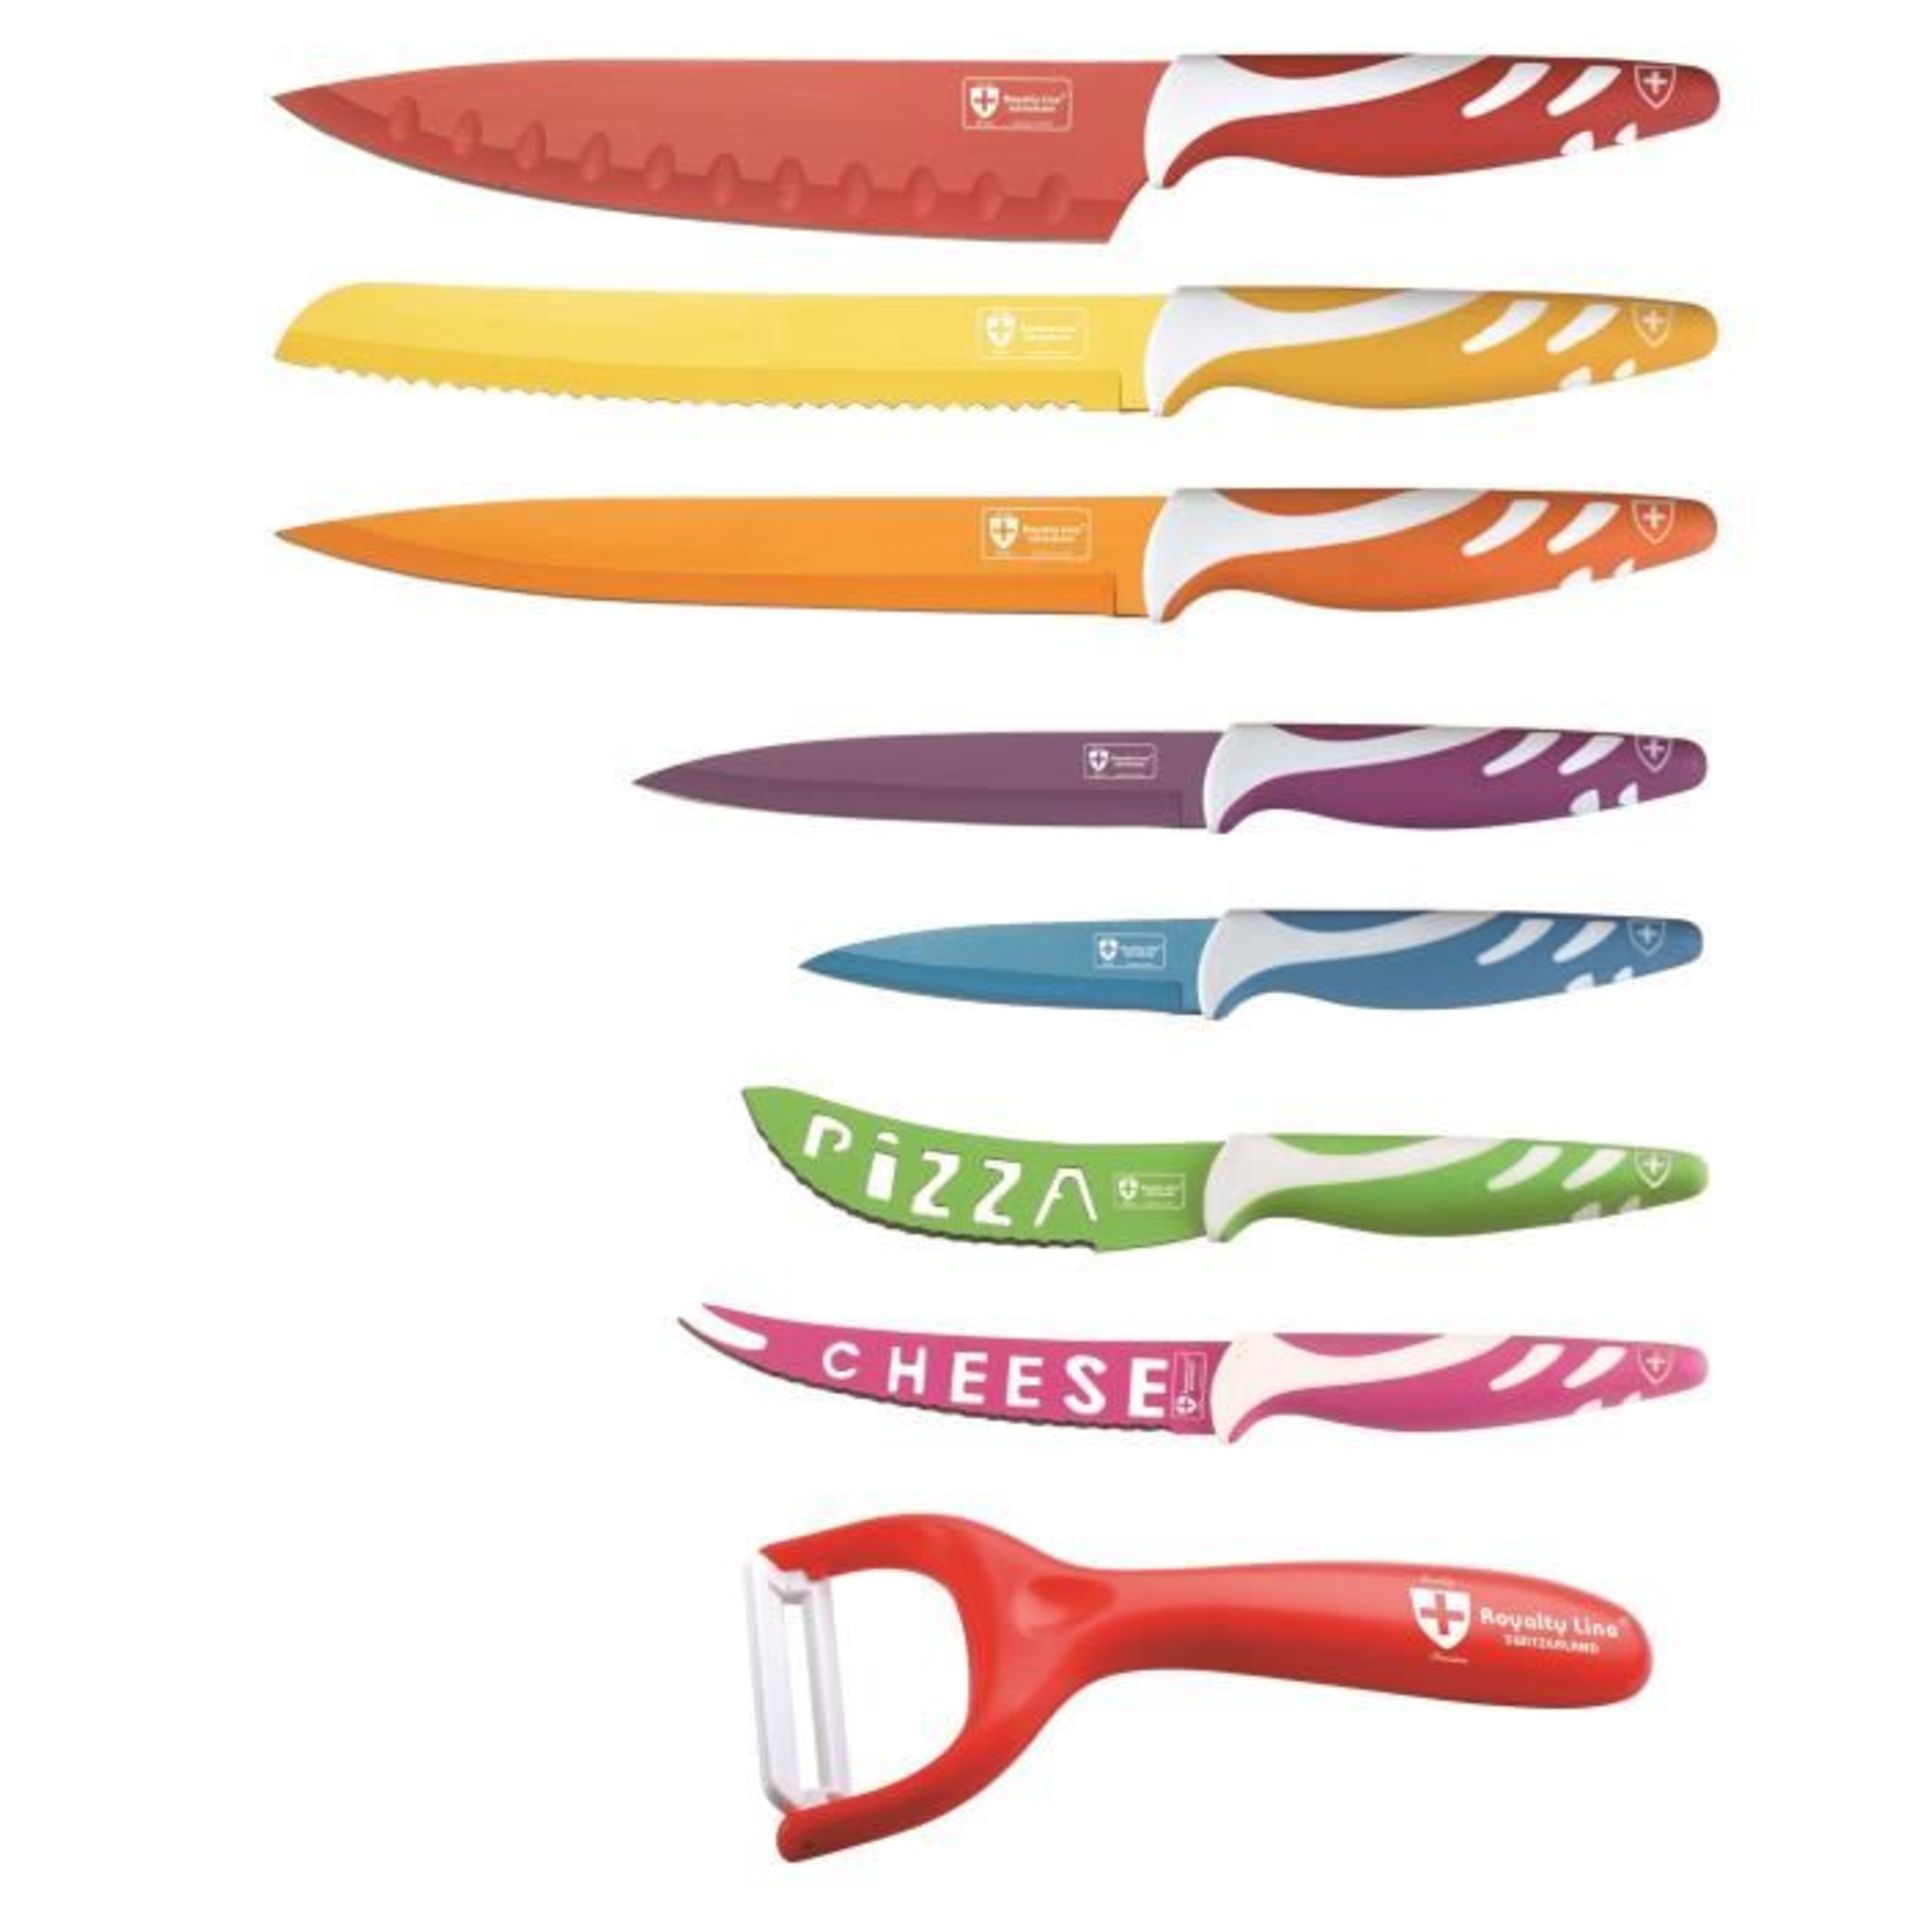 V *TRADE QTY* Brand New 7 Piece Non-Stick Multi Coloured Knife Set RRP99.00 Euros (Handle pattern